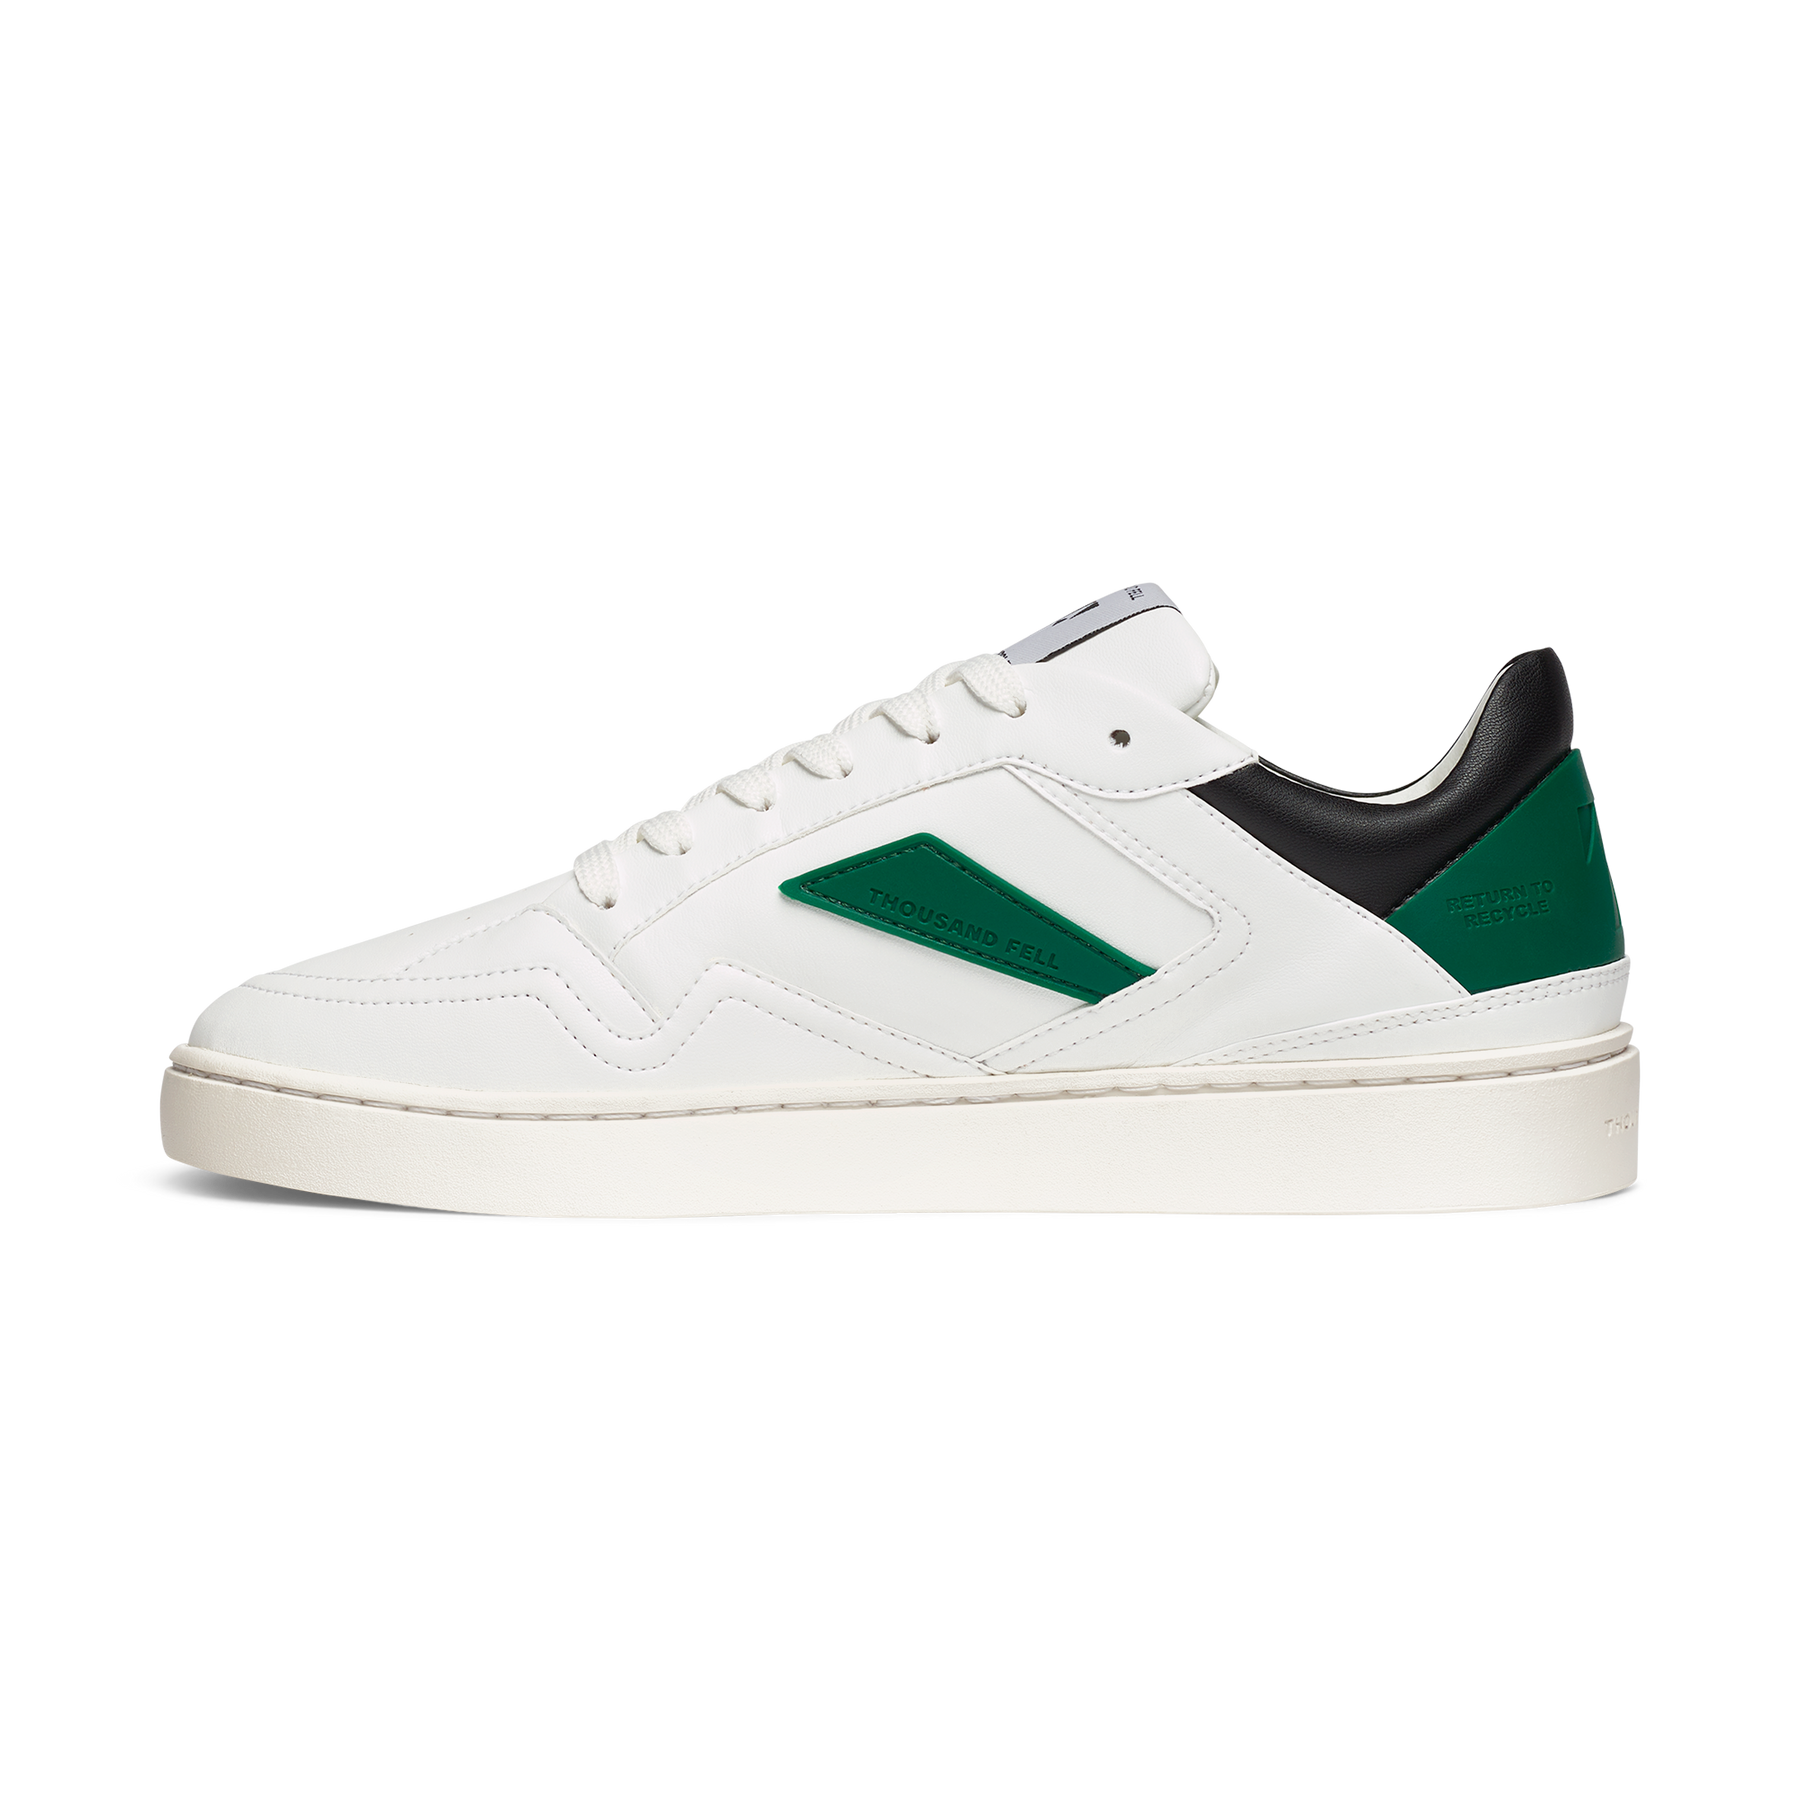 White black and green eco conscious sneakers